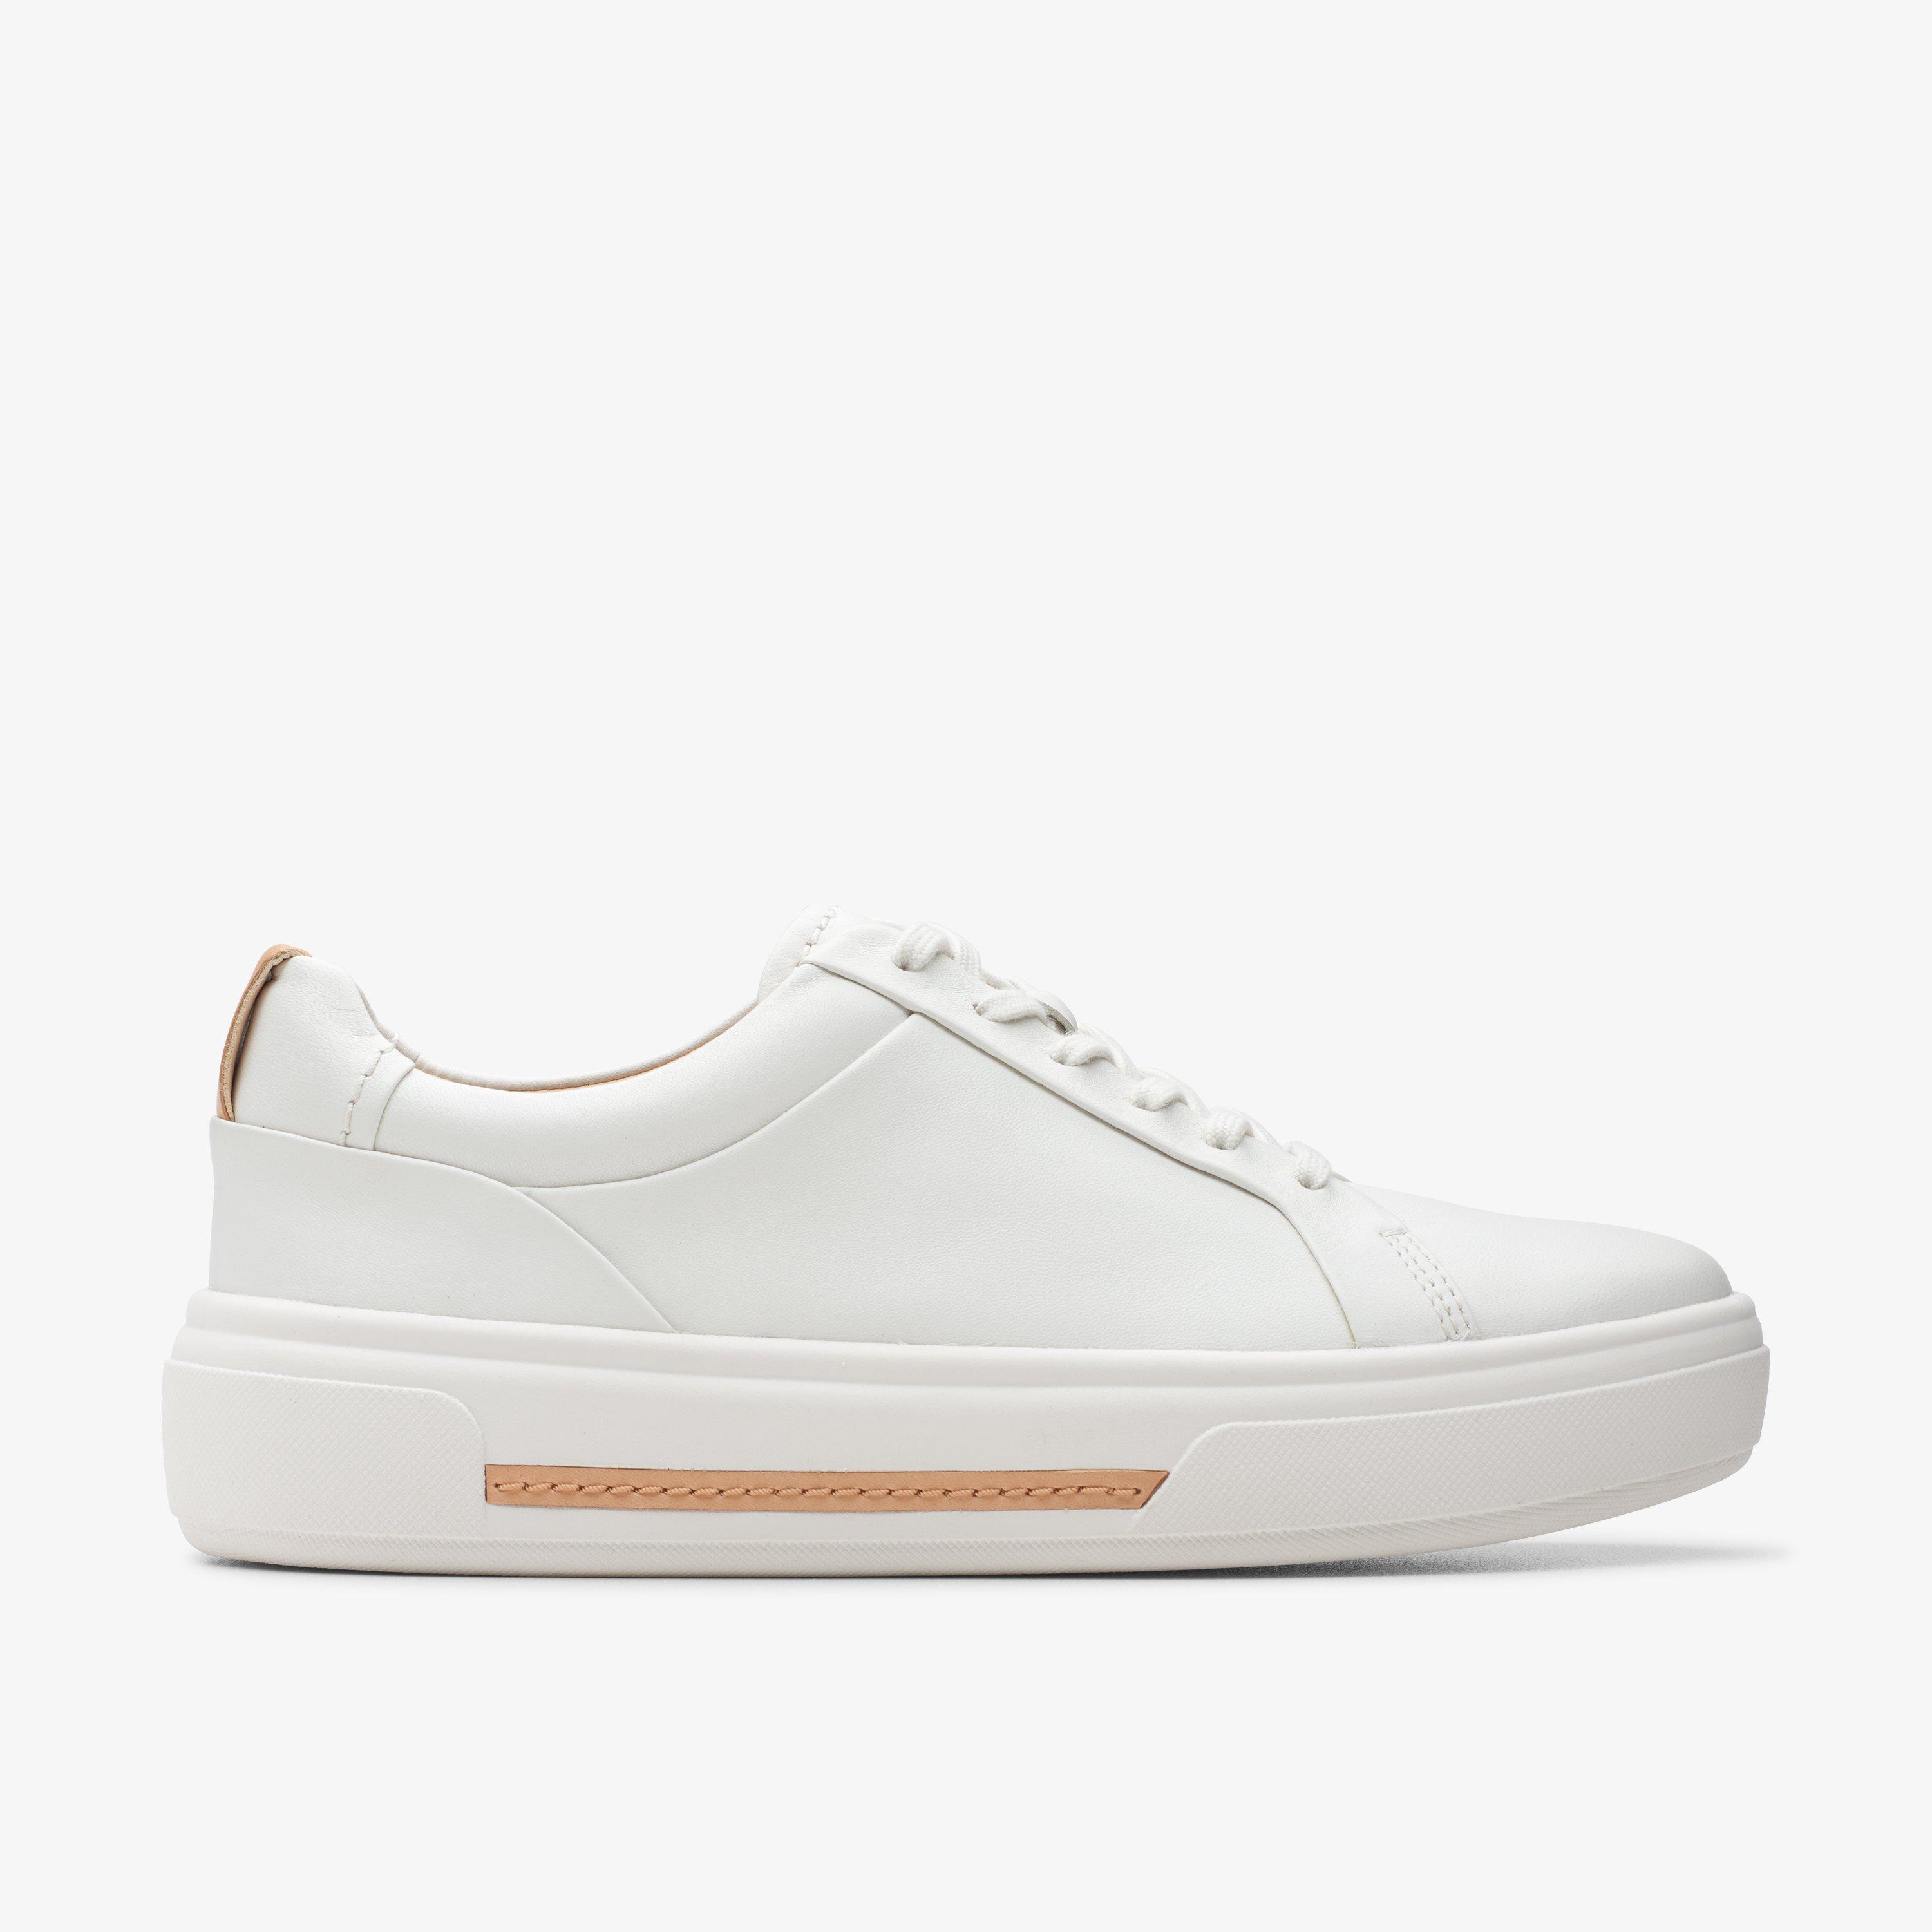 WOMENS Hollyhock Walk Off White Leather Sneakers | Clarks US